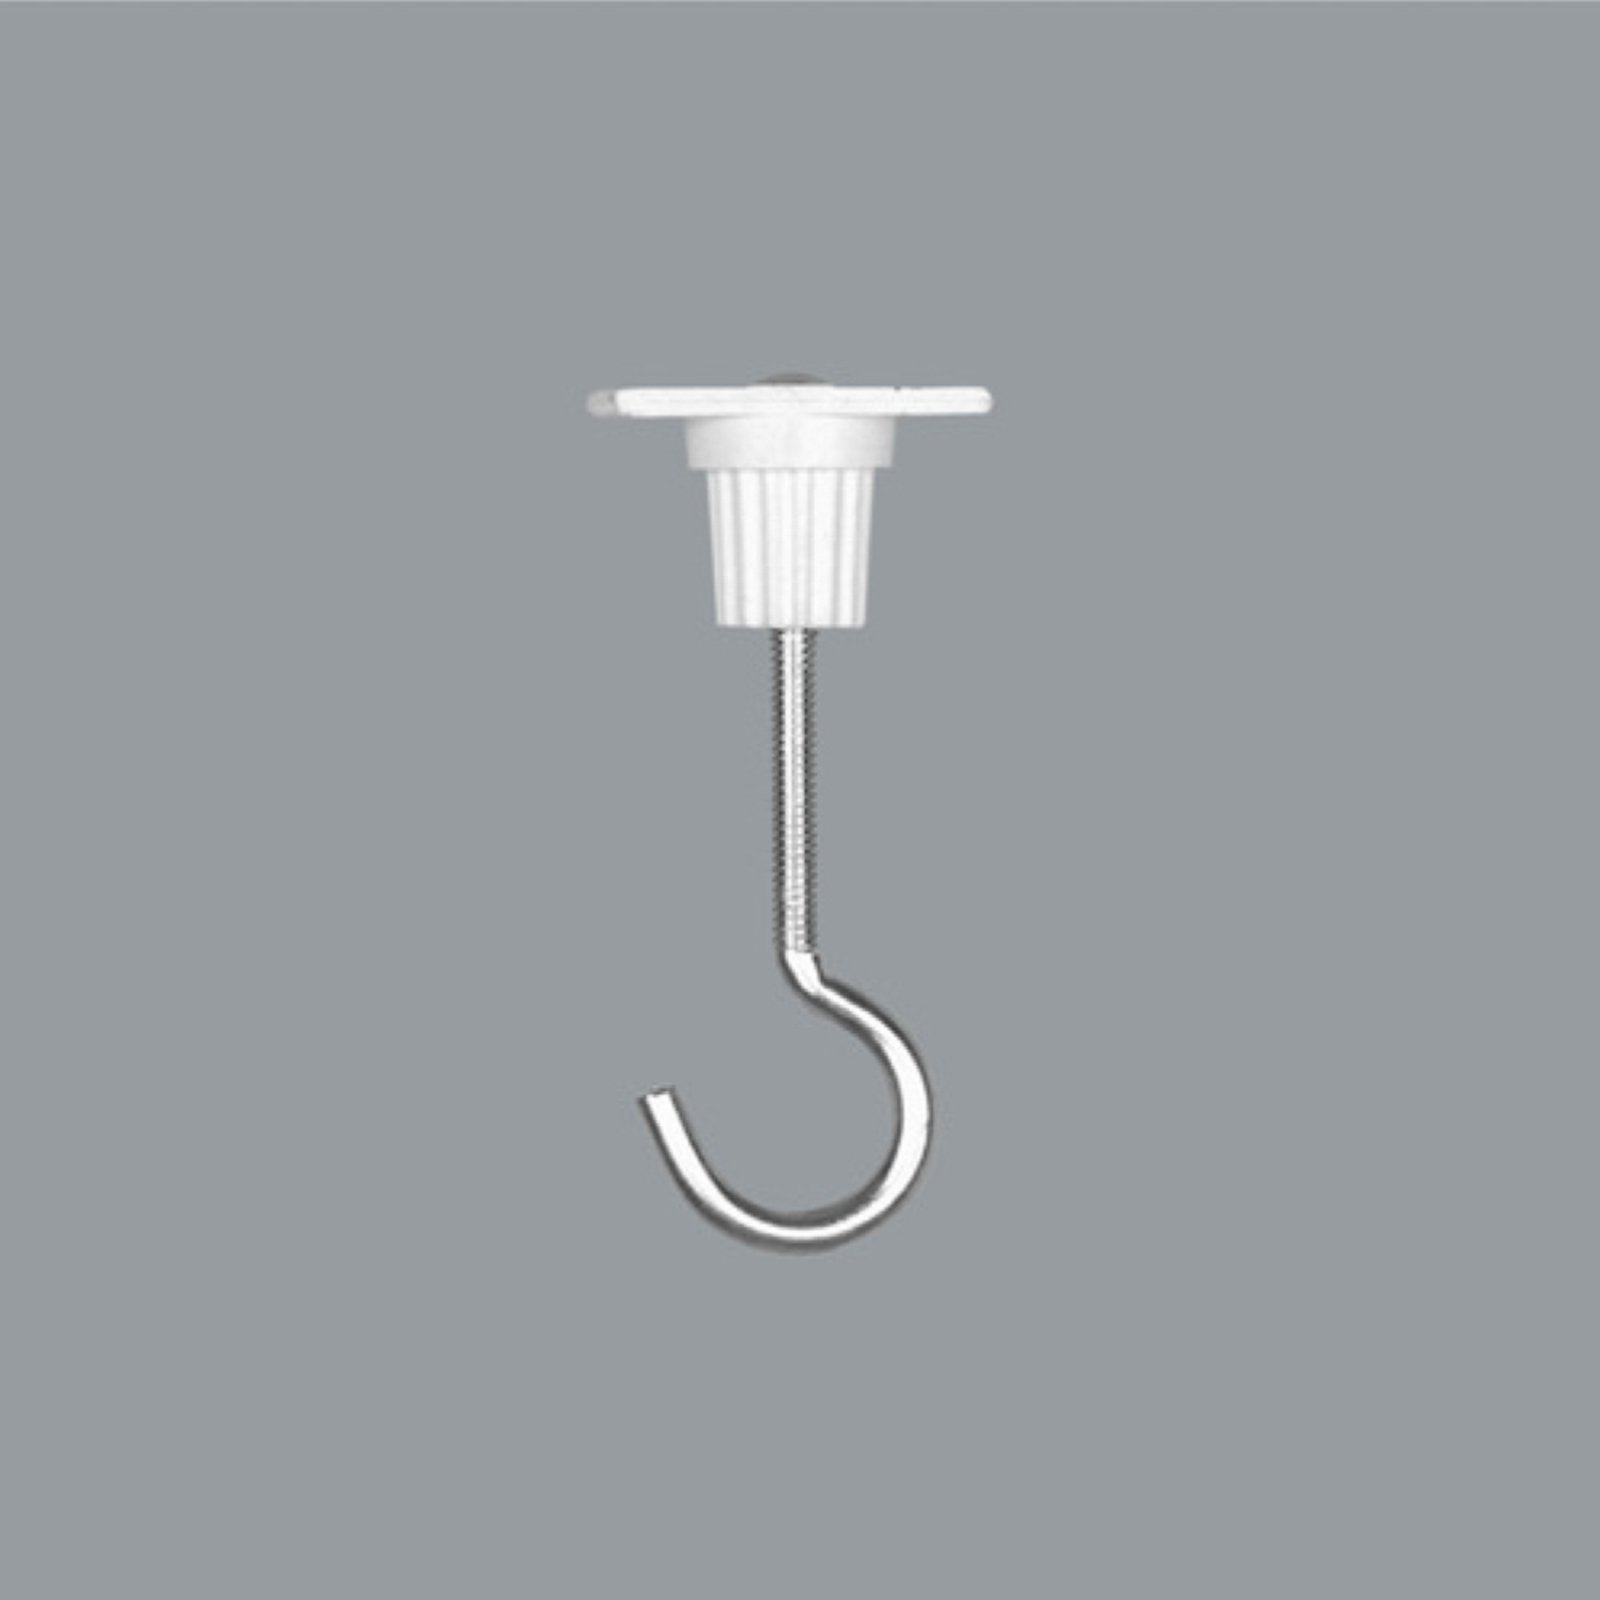 ERCO decorative hook for use in high-voltage track